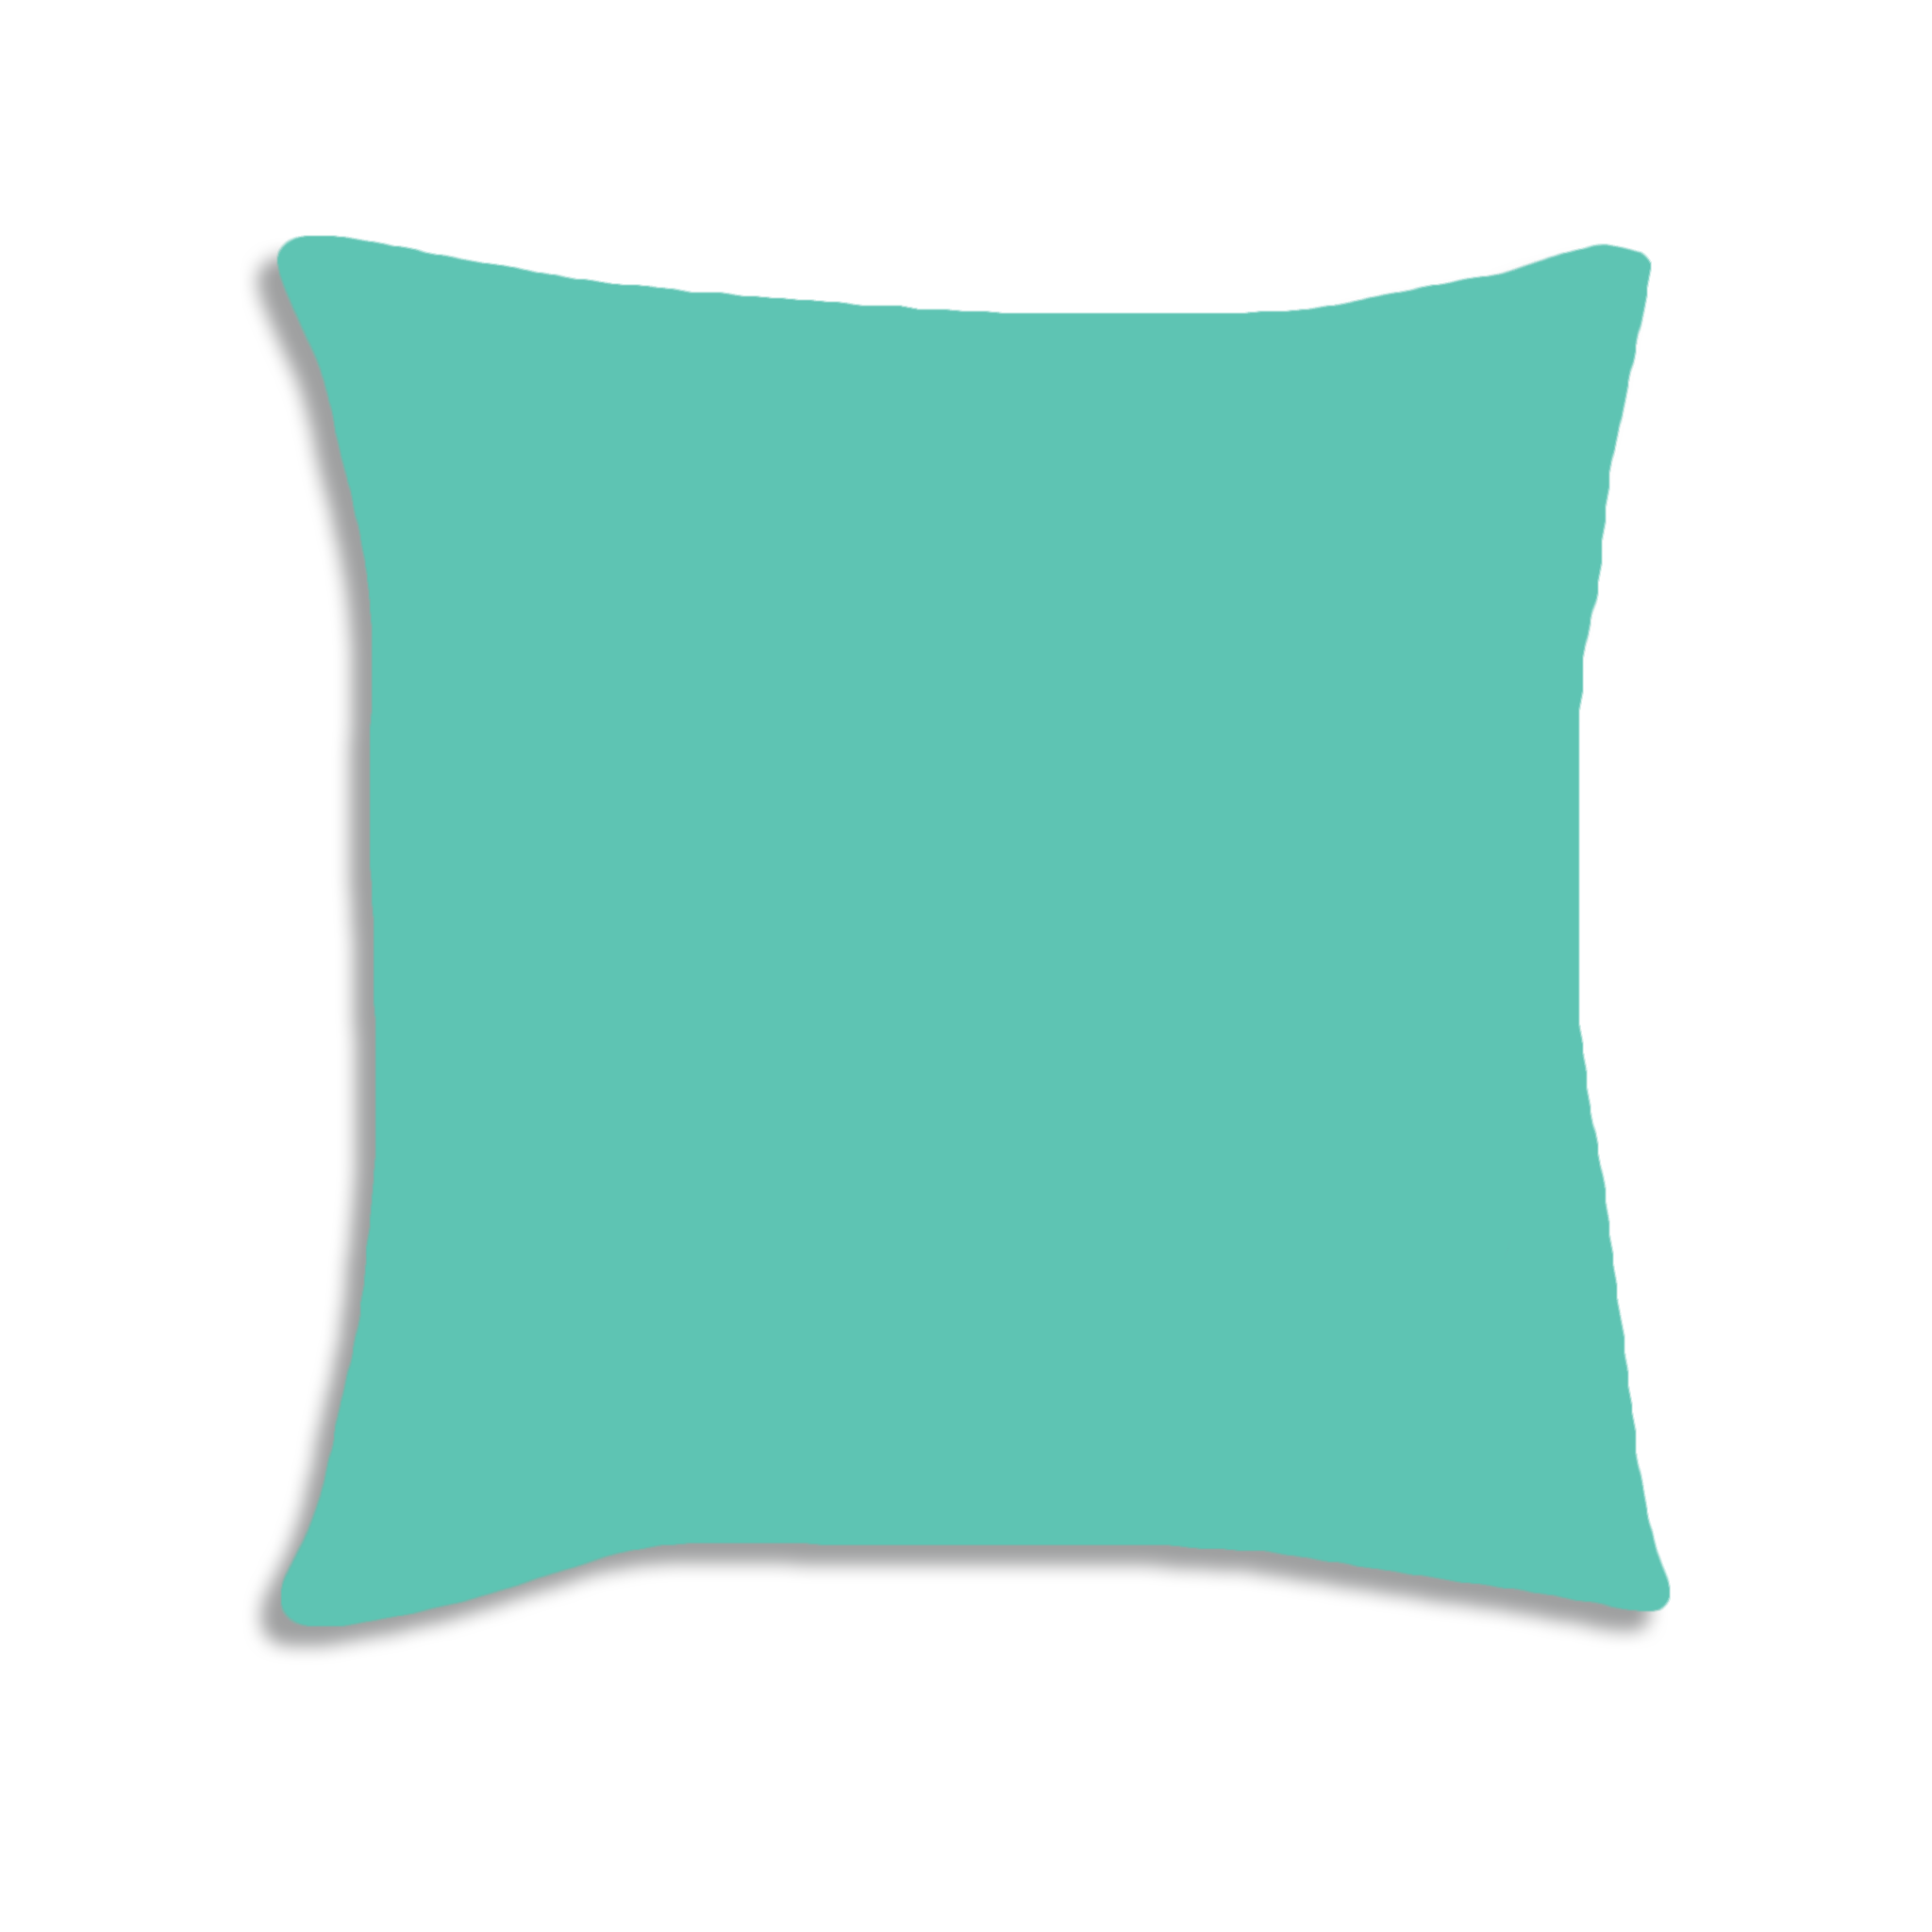 My Pillow Transparent - Pillow clipart soft thing, Pillow soft thing